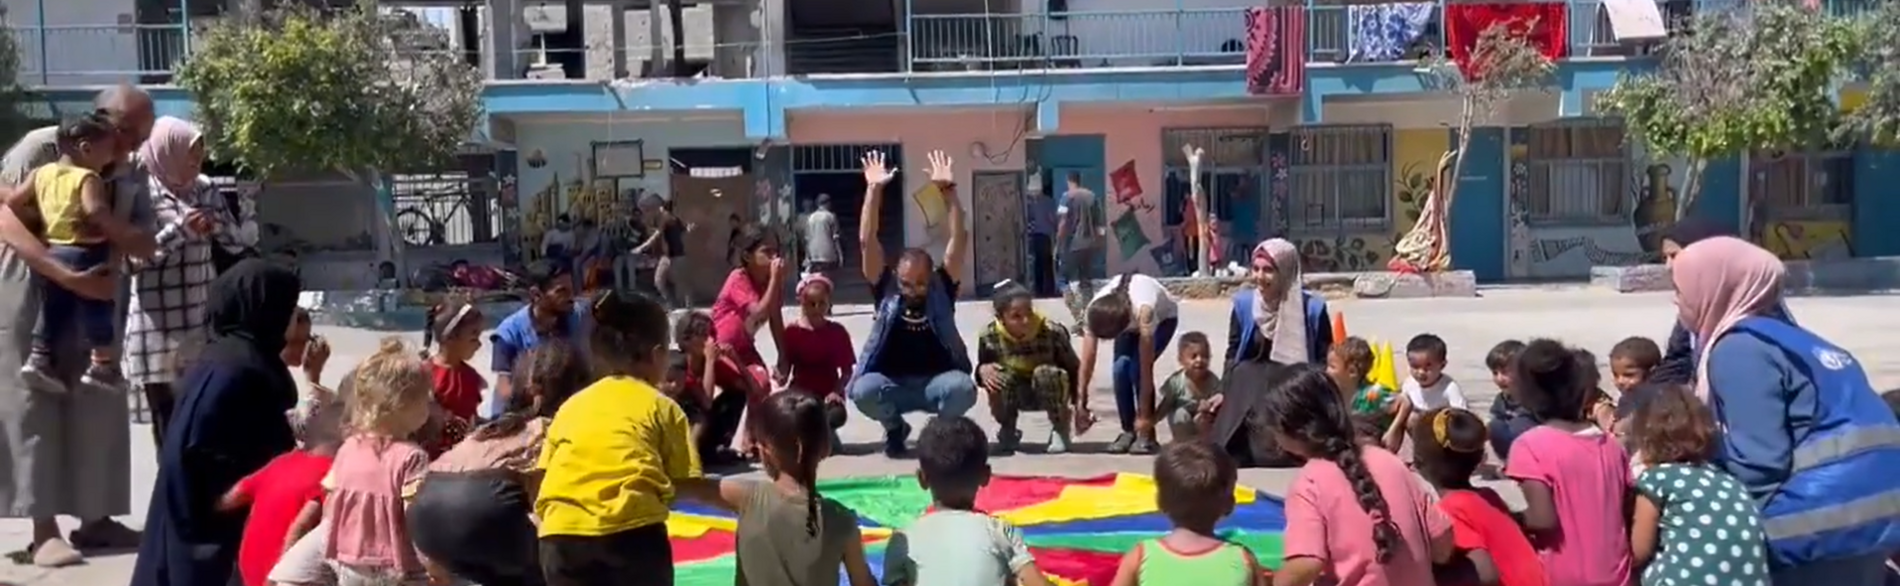 Recreational activities provided by UNRWA to children in Gaza. Photo by UNRWA 